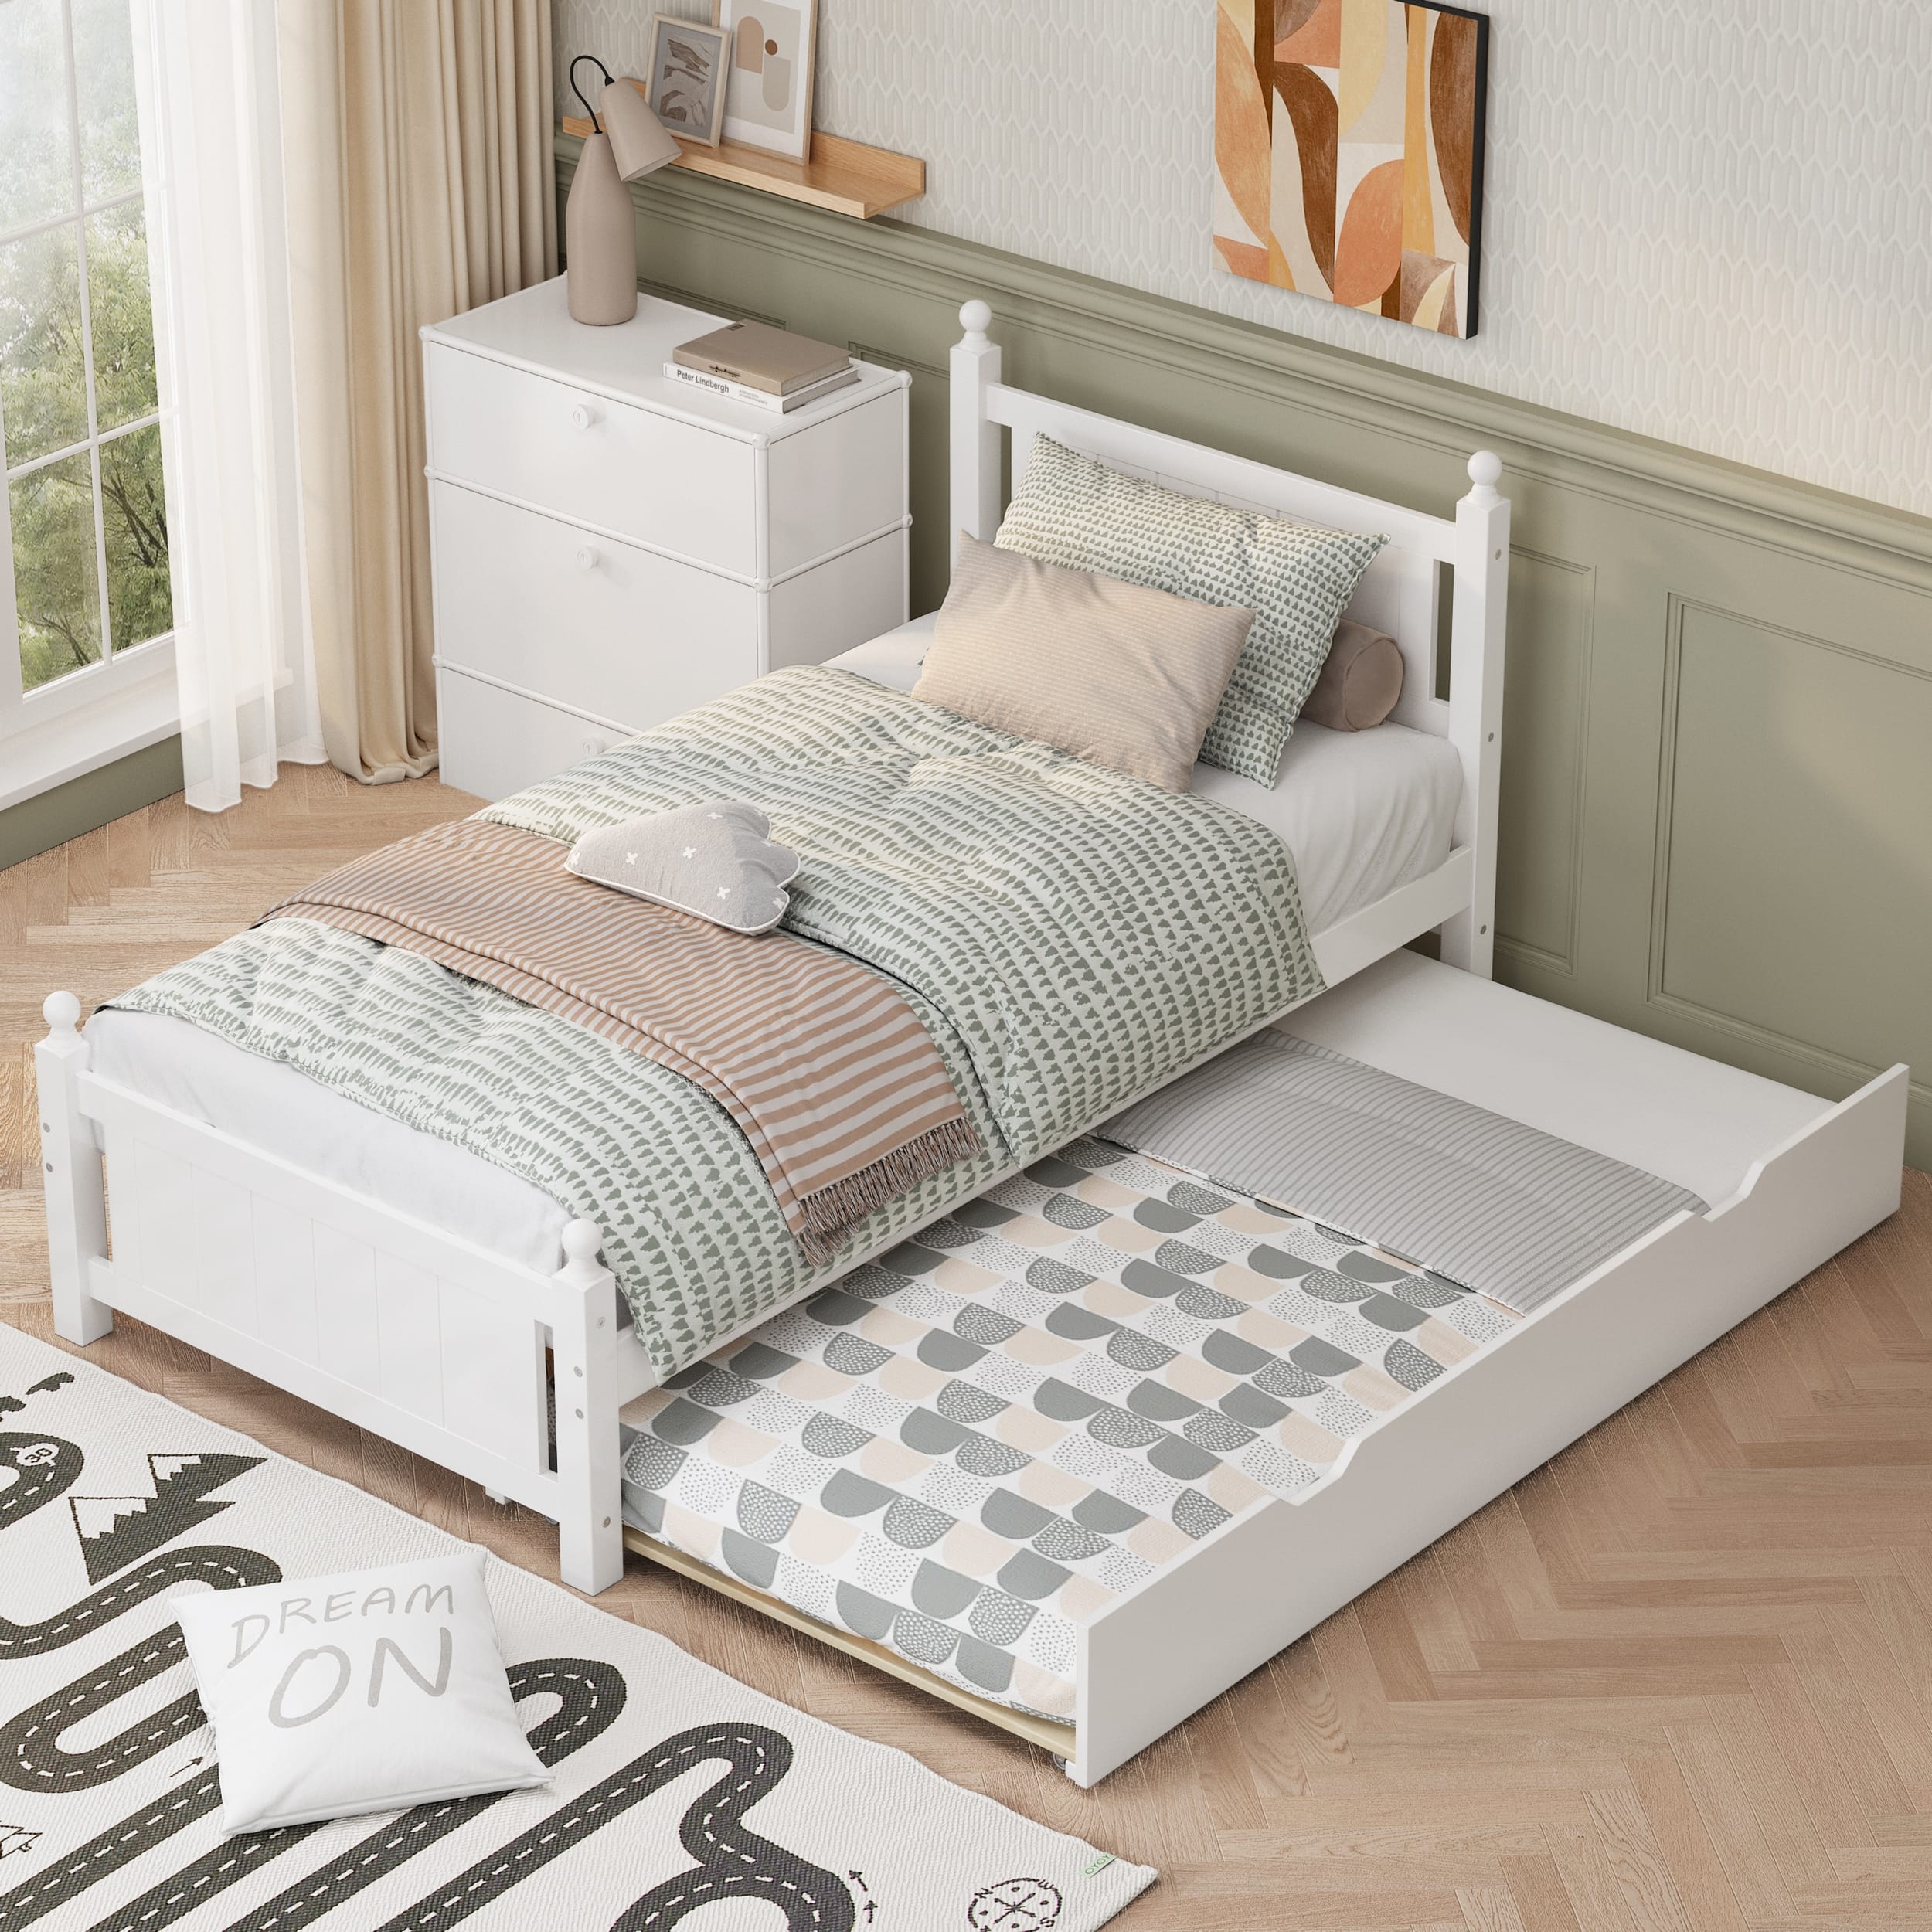 Wooden Twin Size Platform Bed Frame with Trundle, White - Bed Bath ...